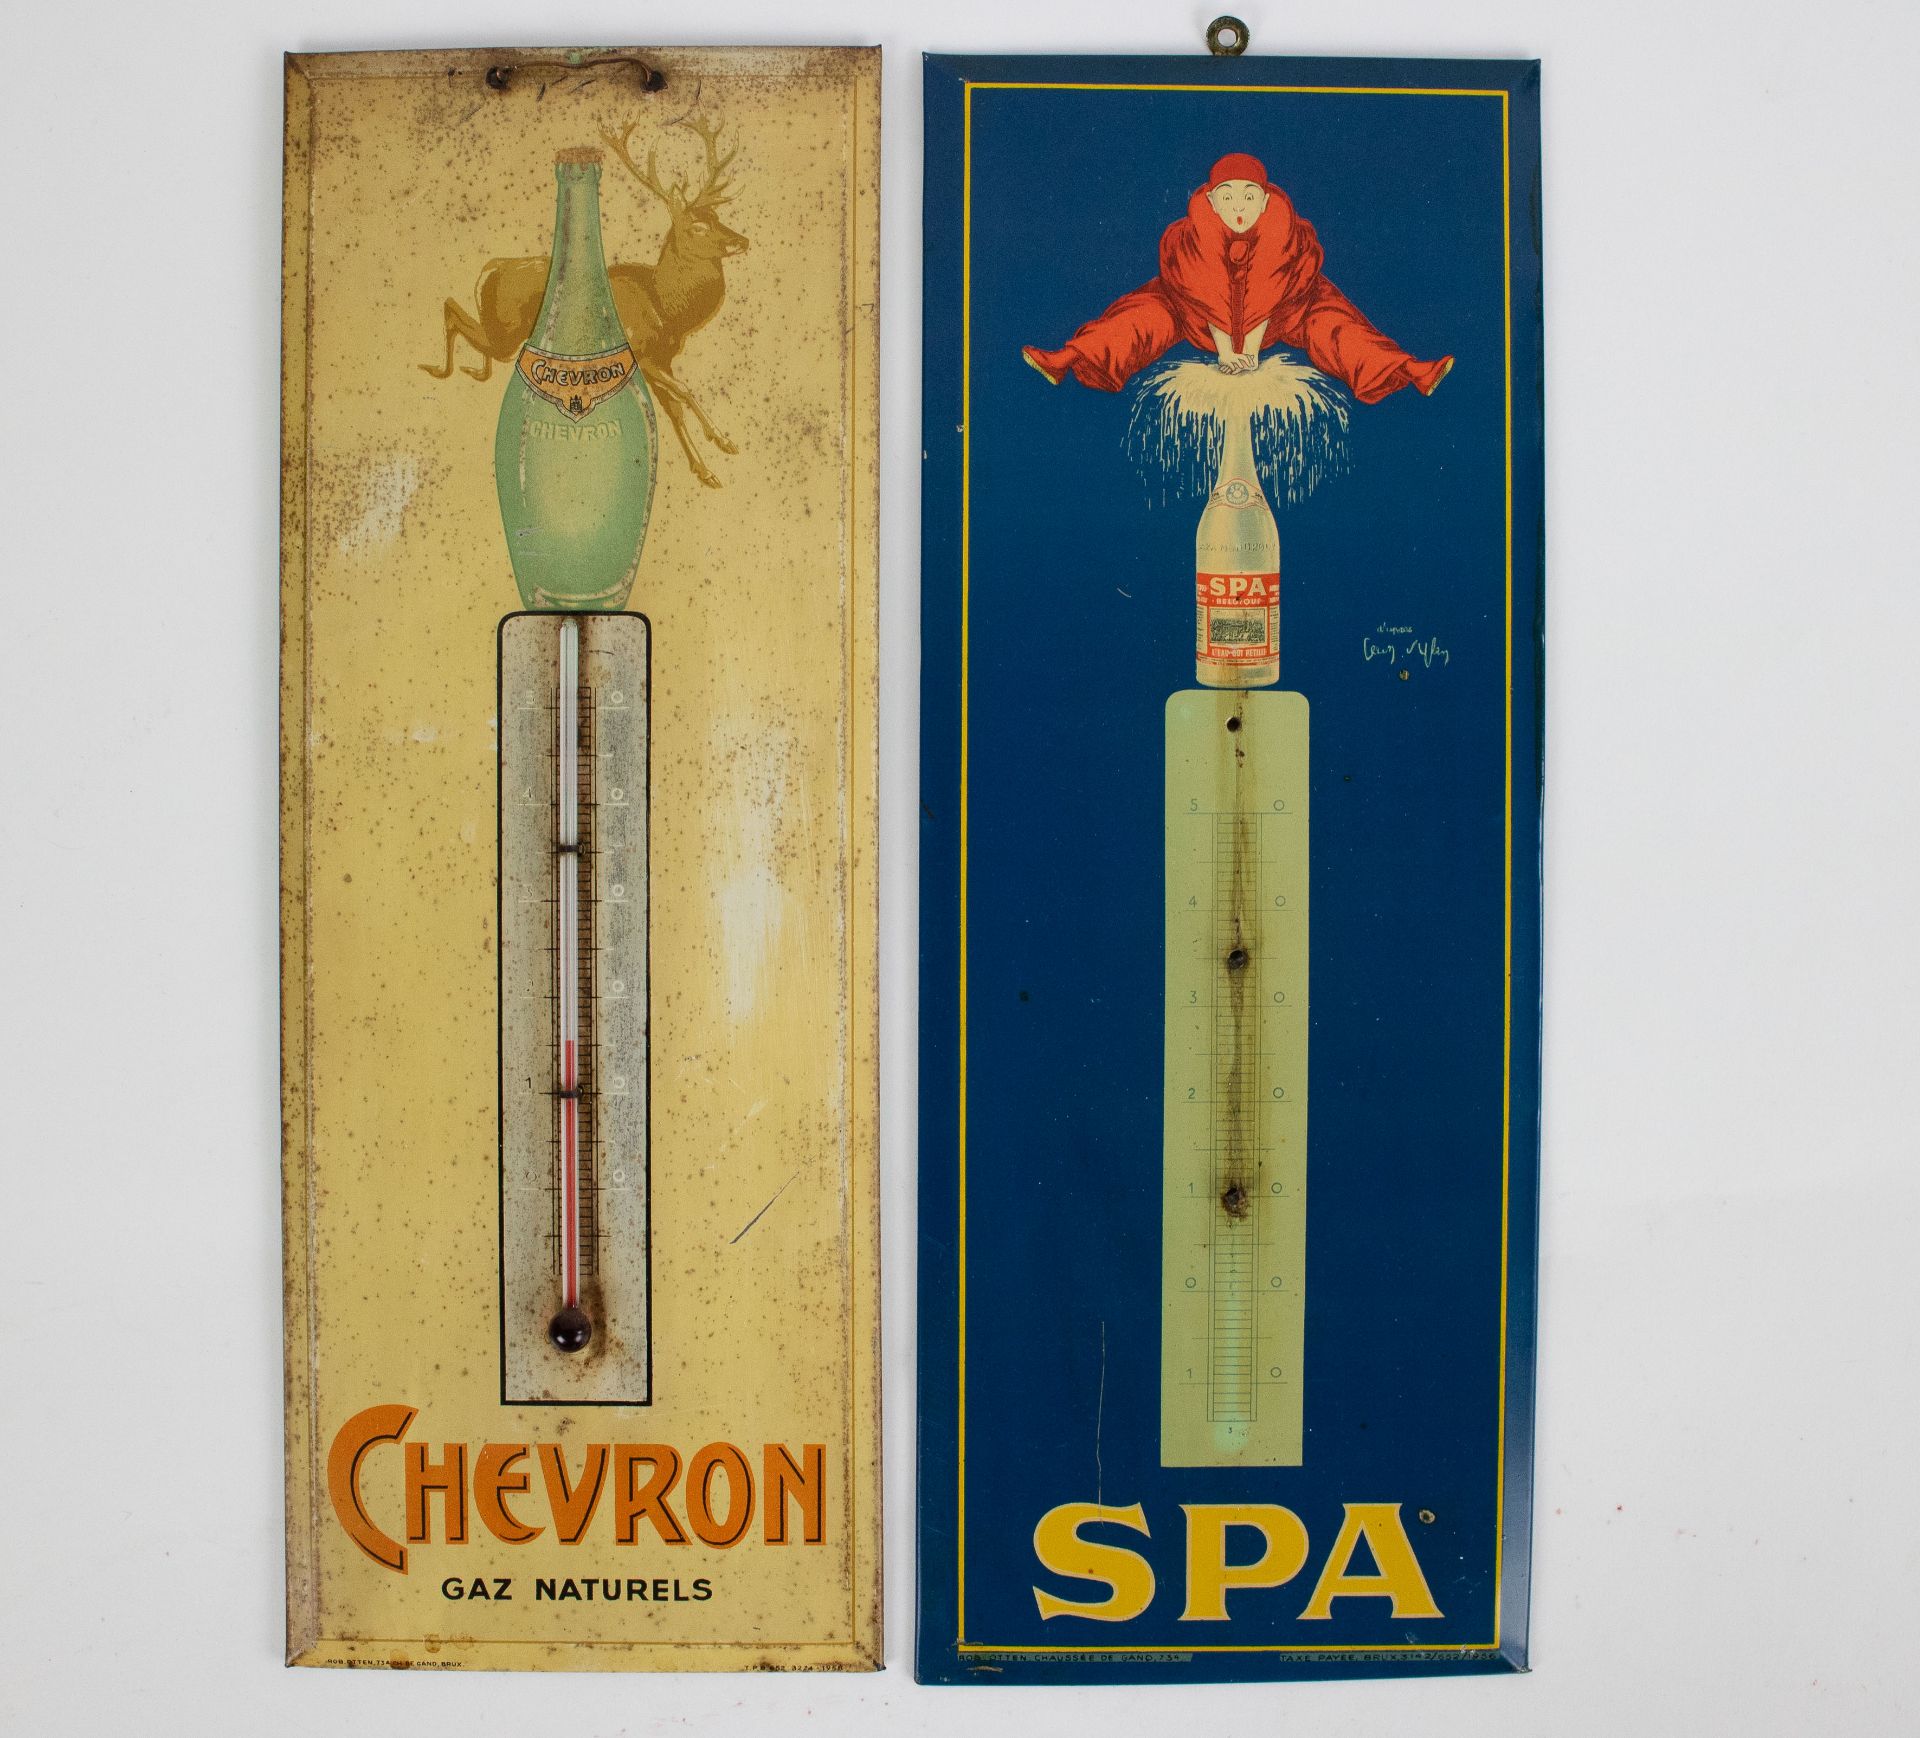 Metal thermometer SPA 1956 and Chevron